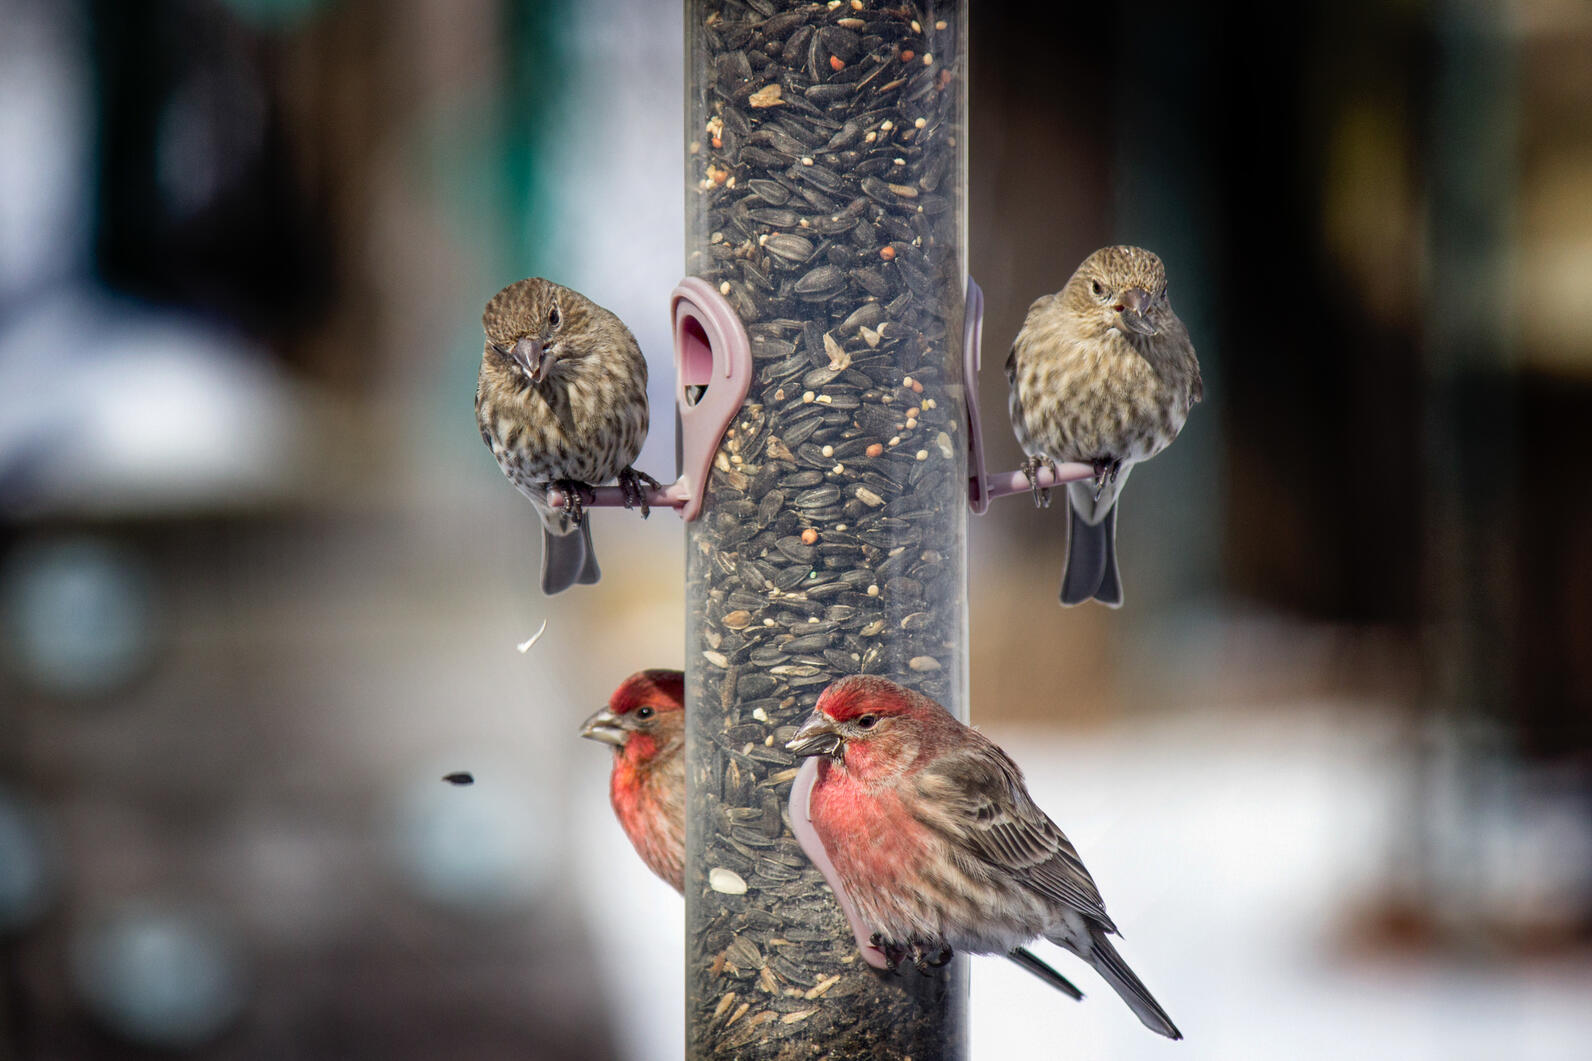 Four House Finches, two male and two female, perch around a tube feeder